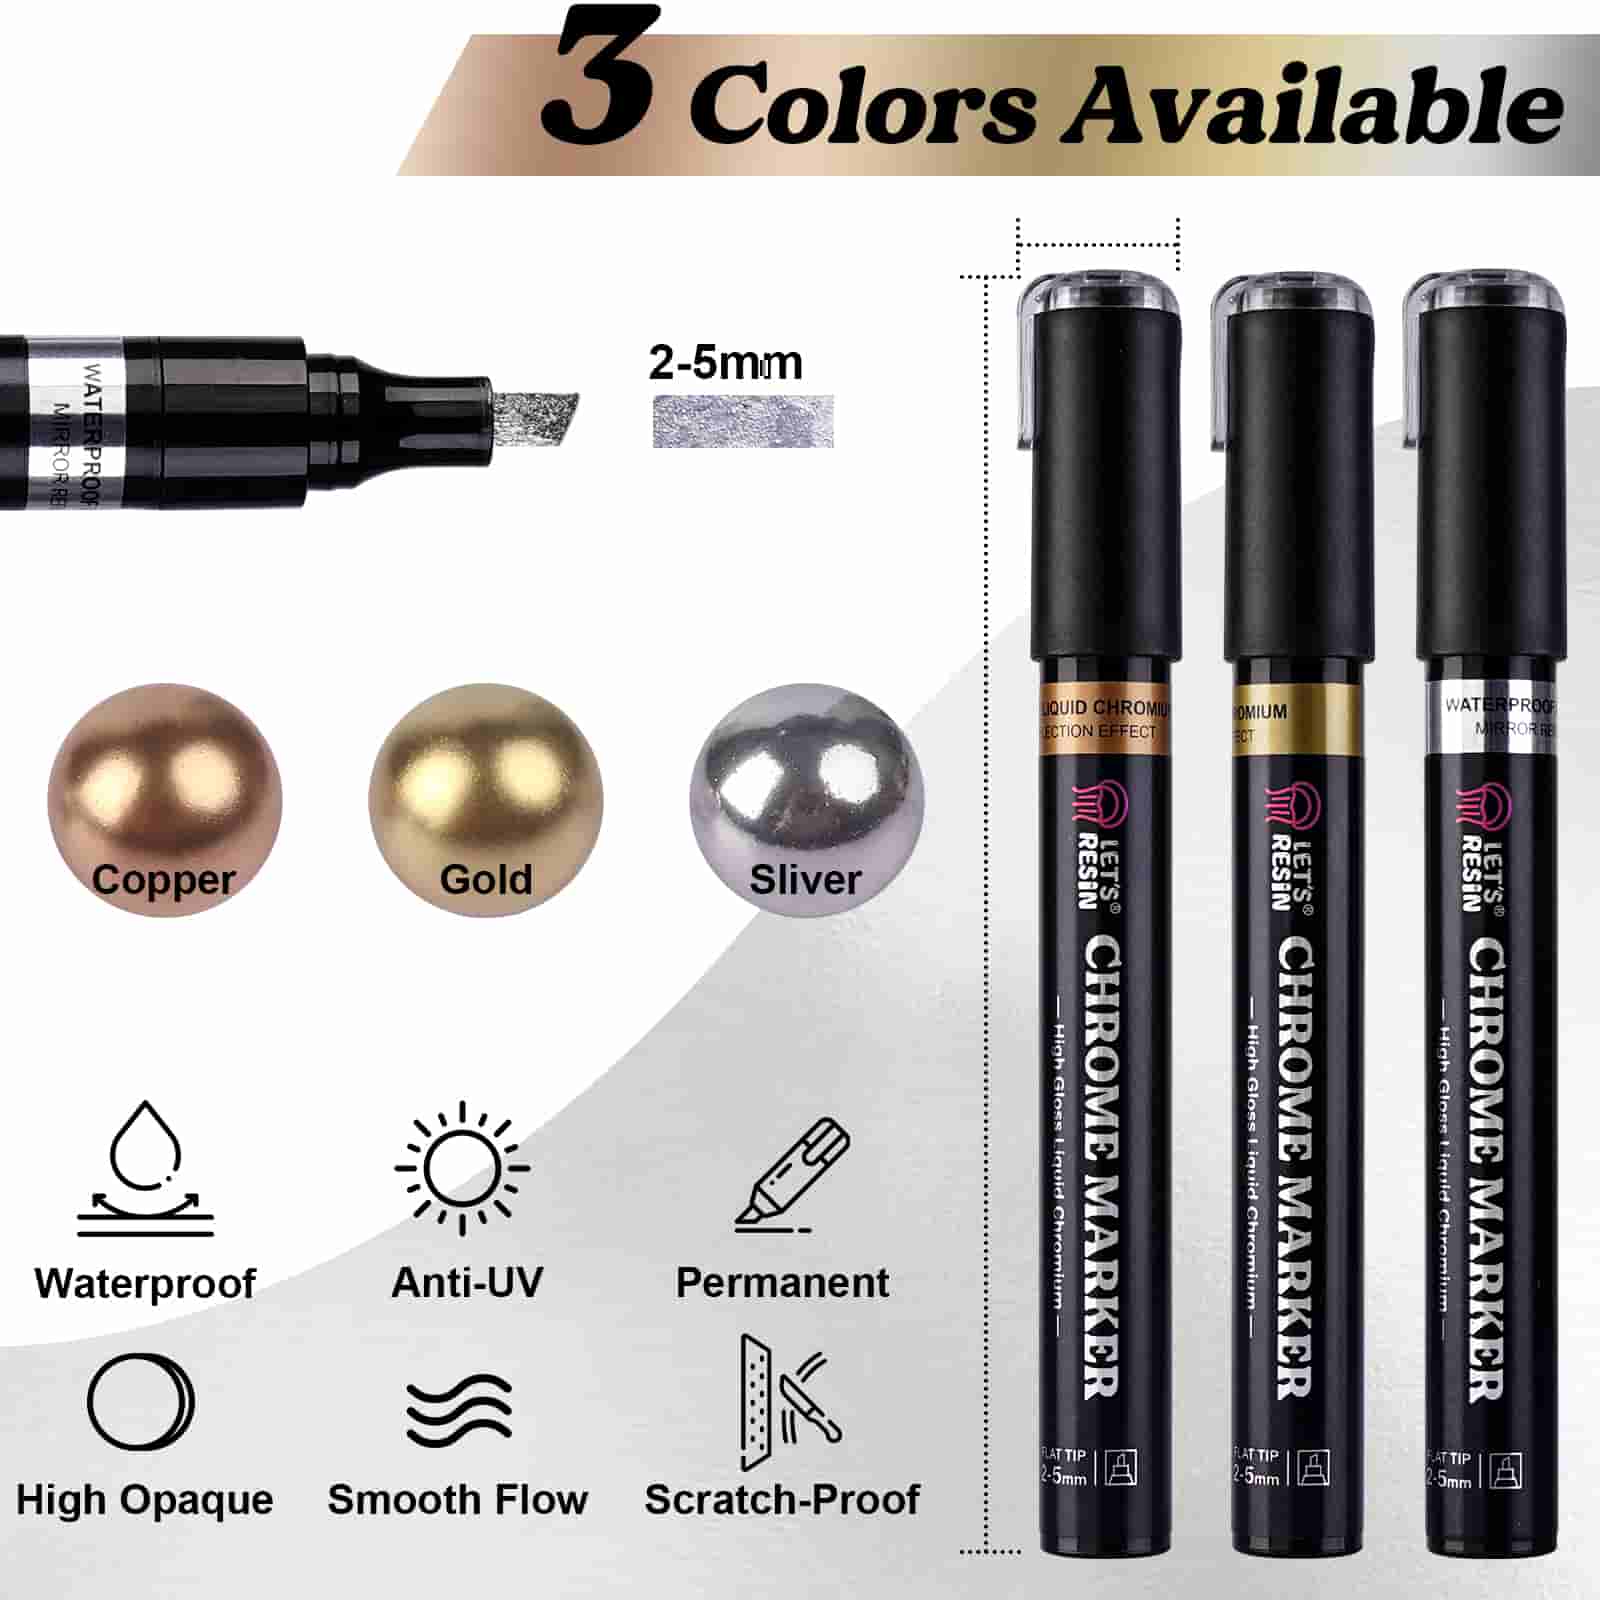 Let's Resin Liquid Mirror Chrome Markers, Reflective Gloss Metallic Markers, Resin Supplies for Coloring, Stroke, Painting, DIY Craft